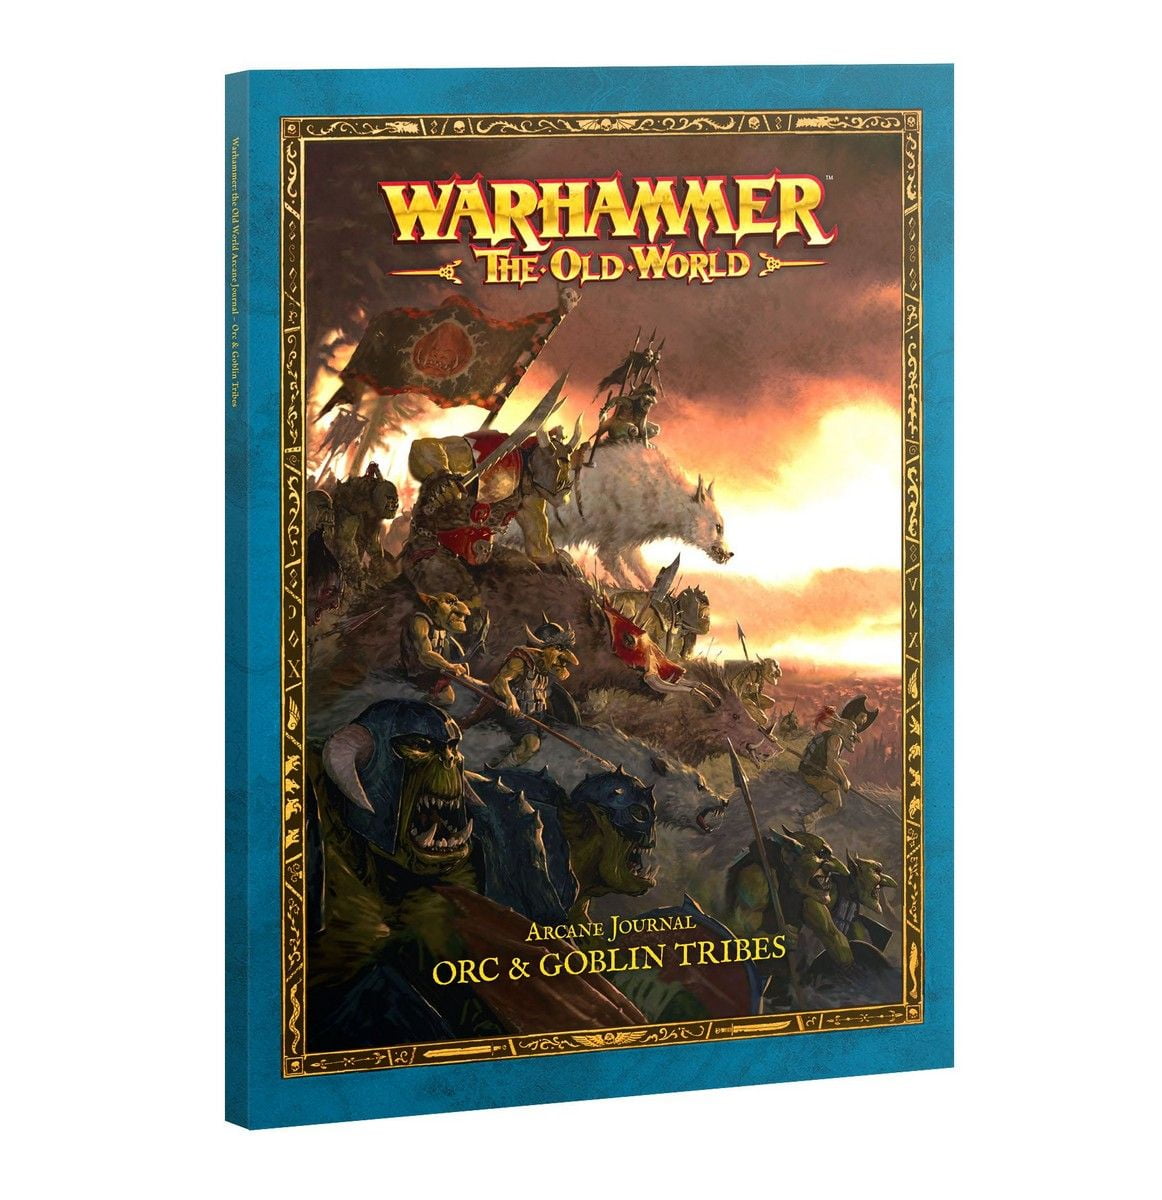 Warhammer: The Old World: Arcane Journal - Orc & Goblin Tribes